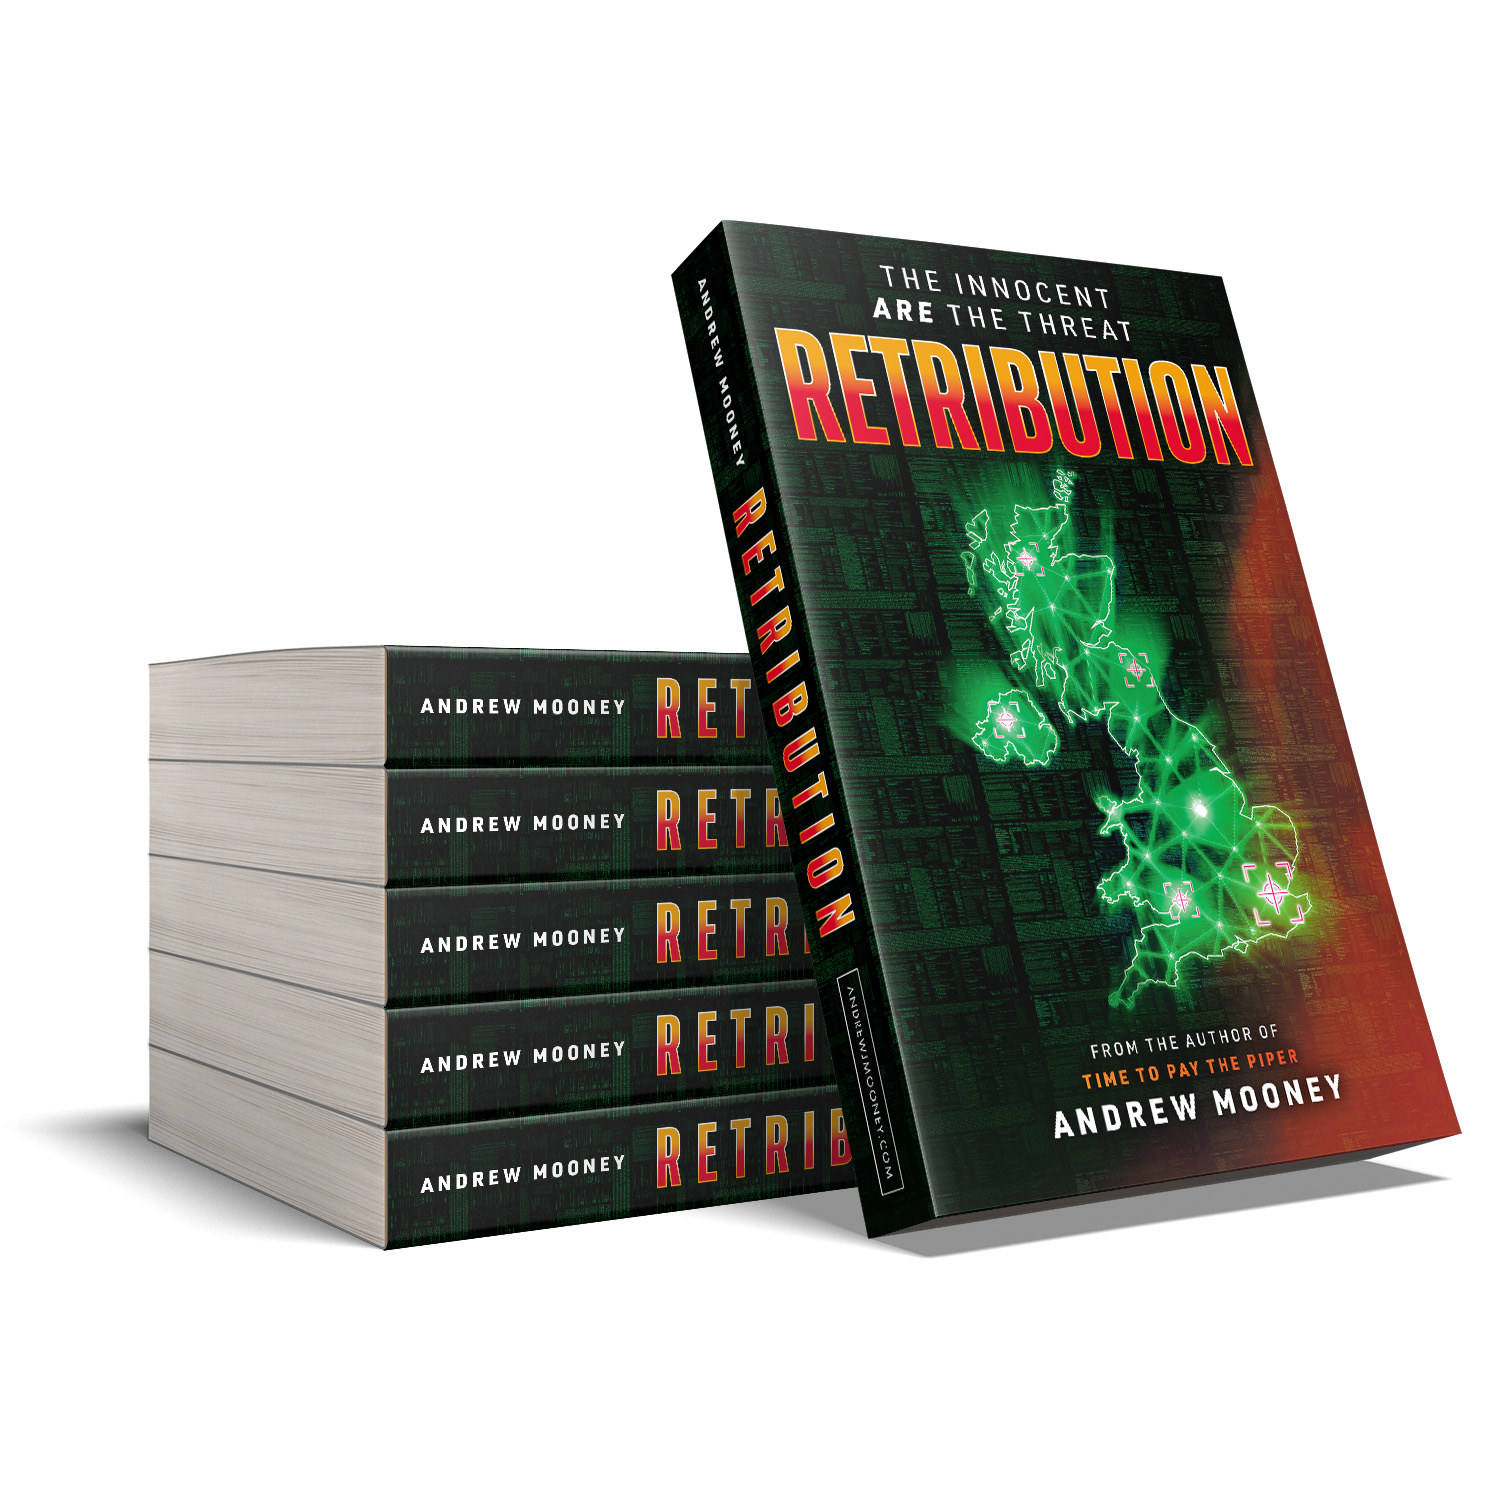 'Retribution' is a dramatic techno-terrorism thriller. The author is Andrew Mooney. The book cover and interior formatting are designed by Mark Thomas of coverness.com. To find out more about my book design services, please visit www.coverness.com